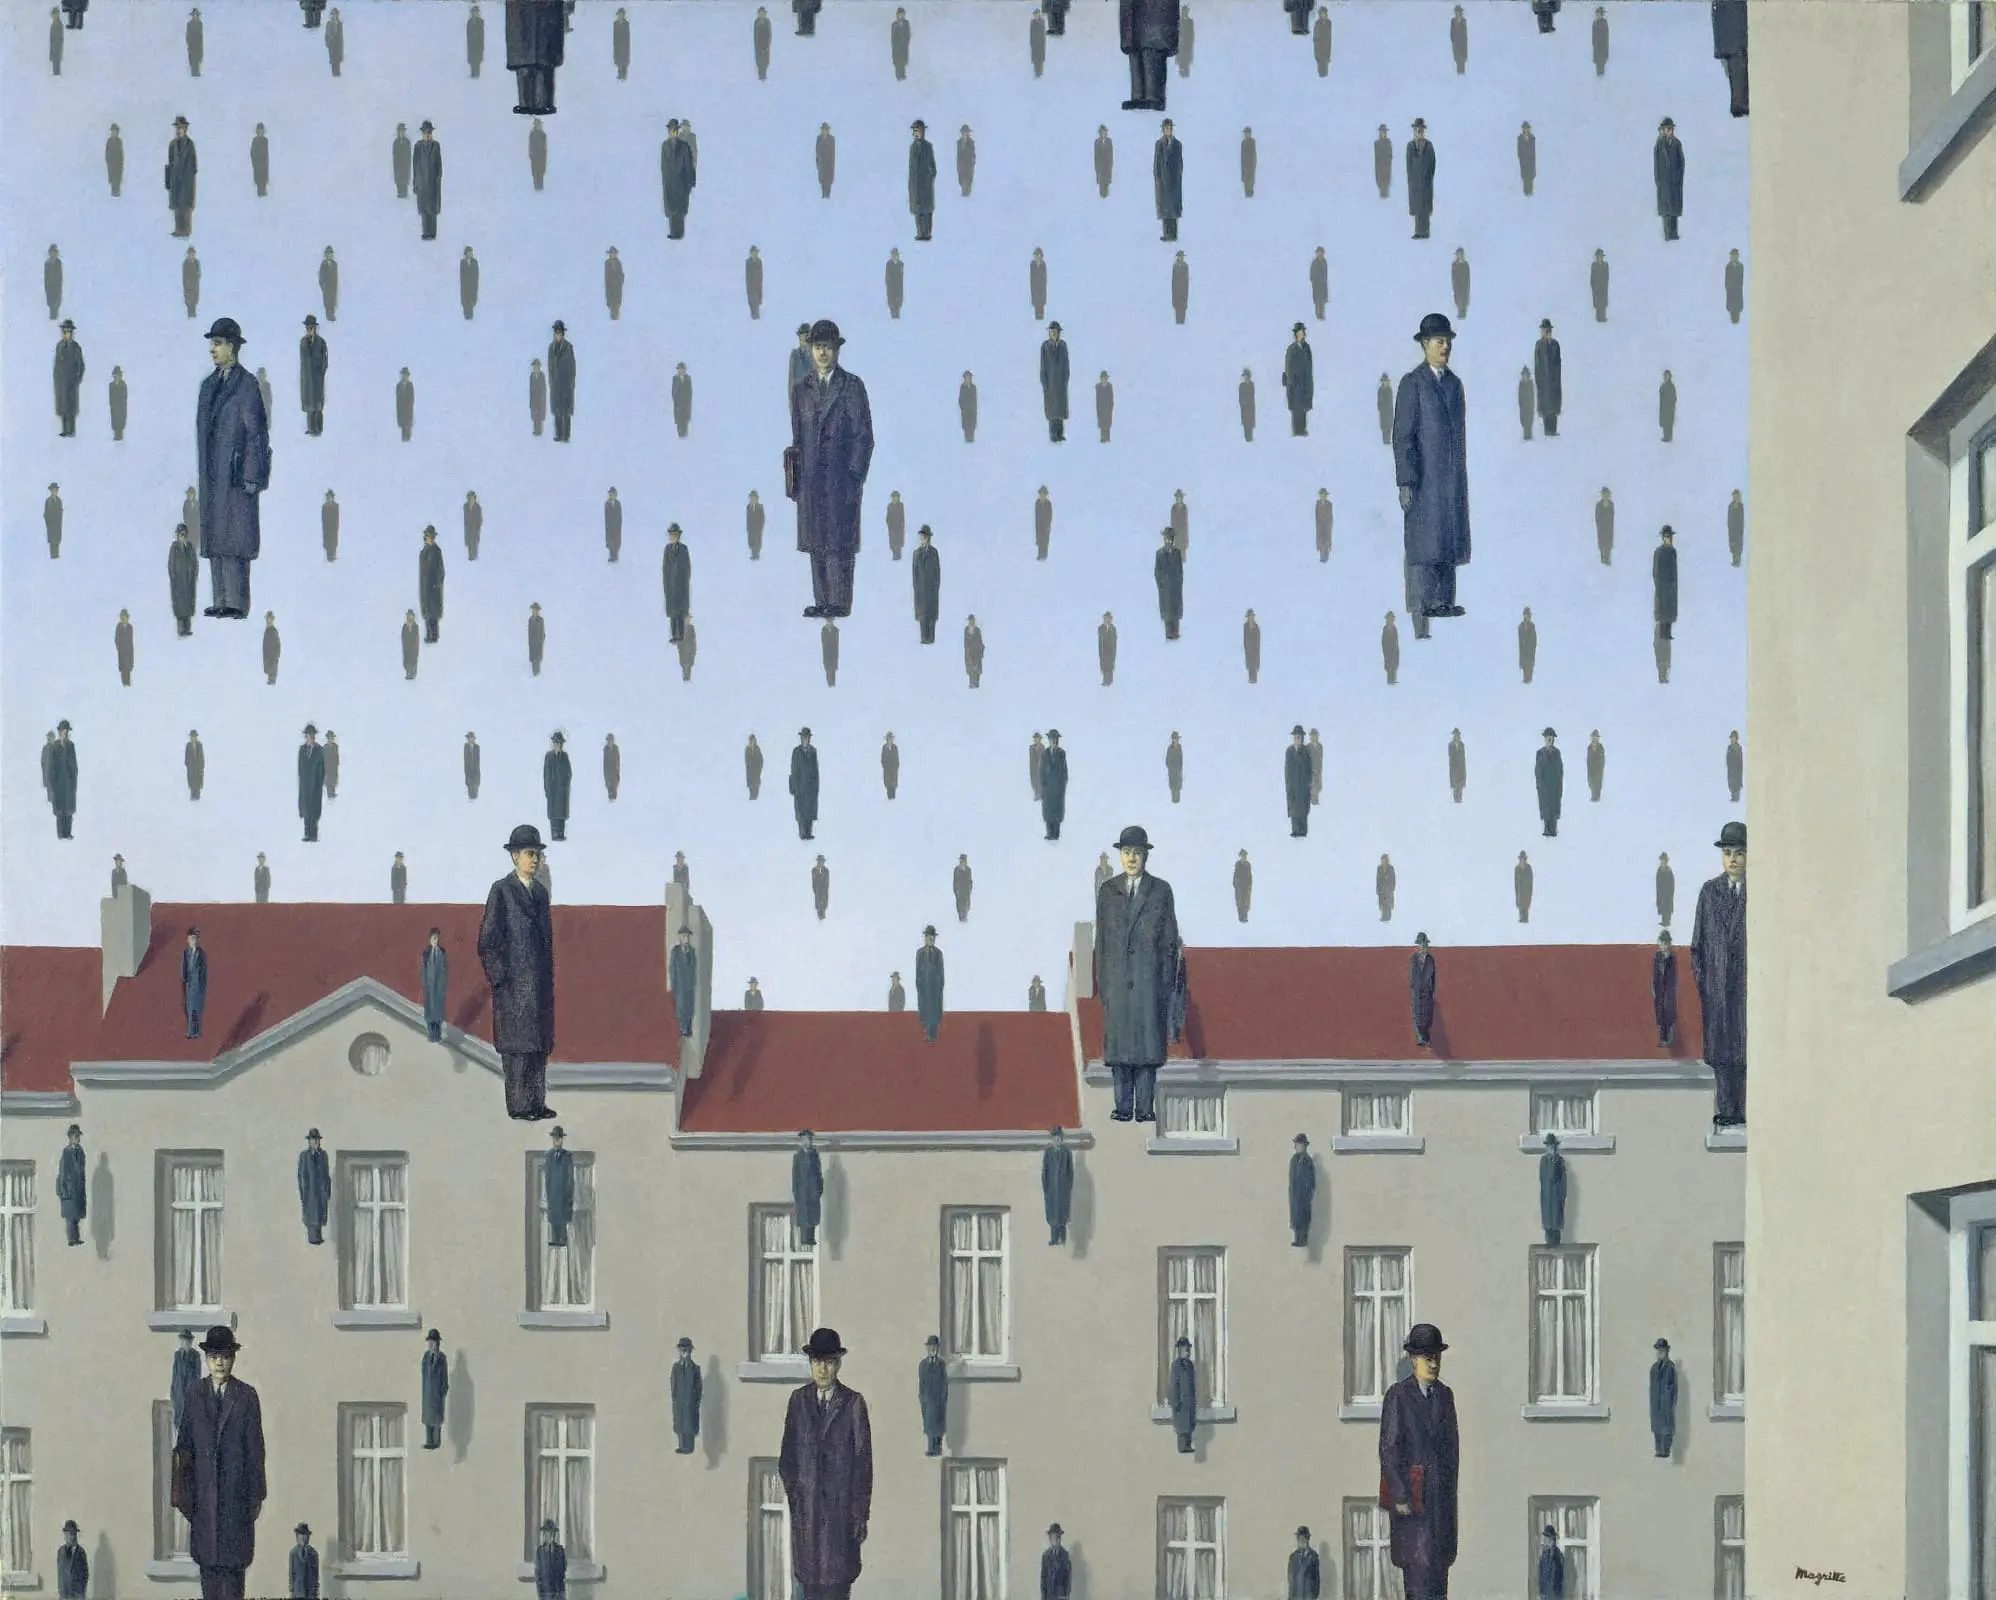 Golconda, Rene Magritte - Meaning and Analysis, 1953, Interpretation of the Painting